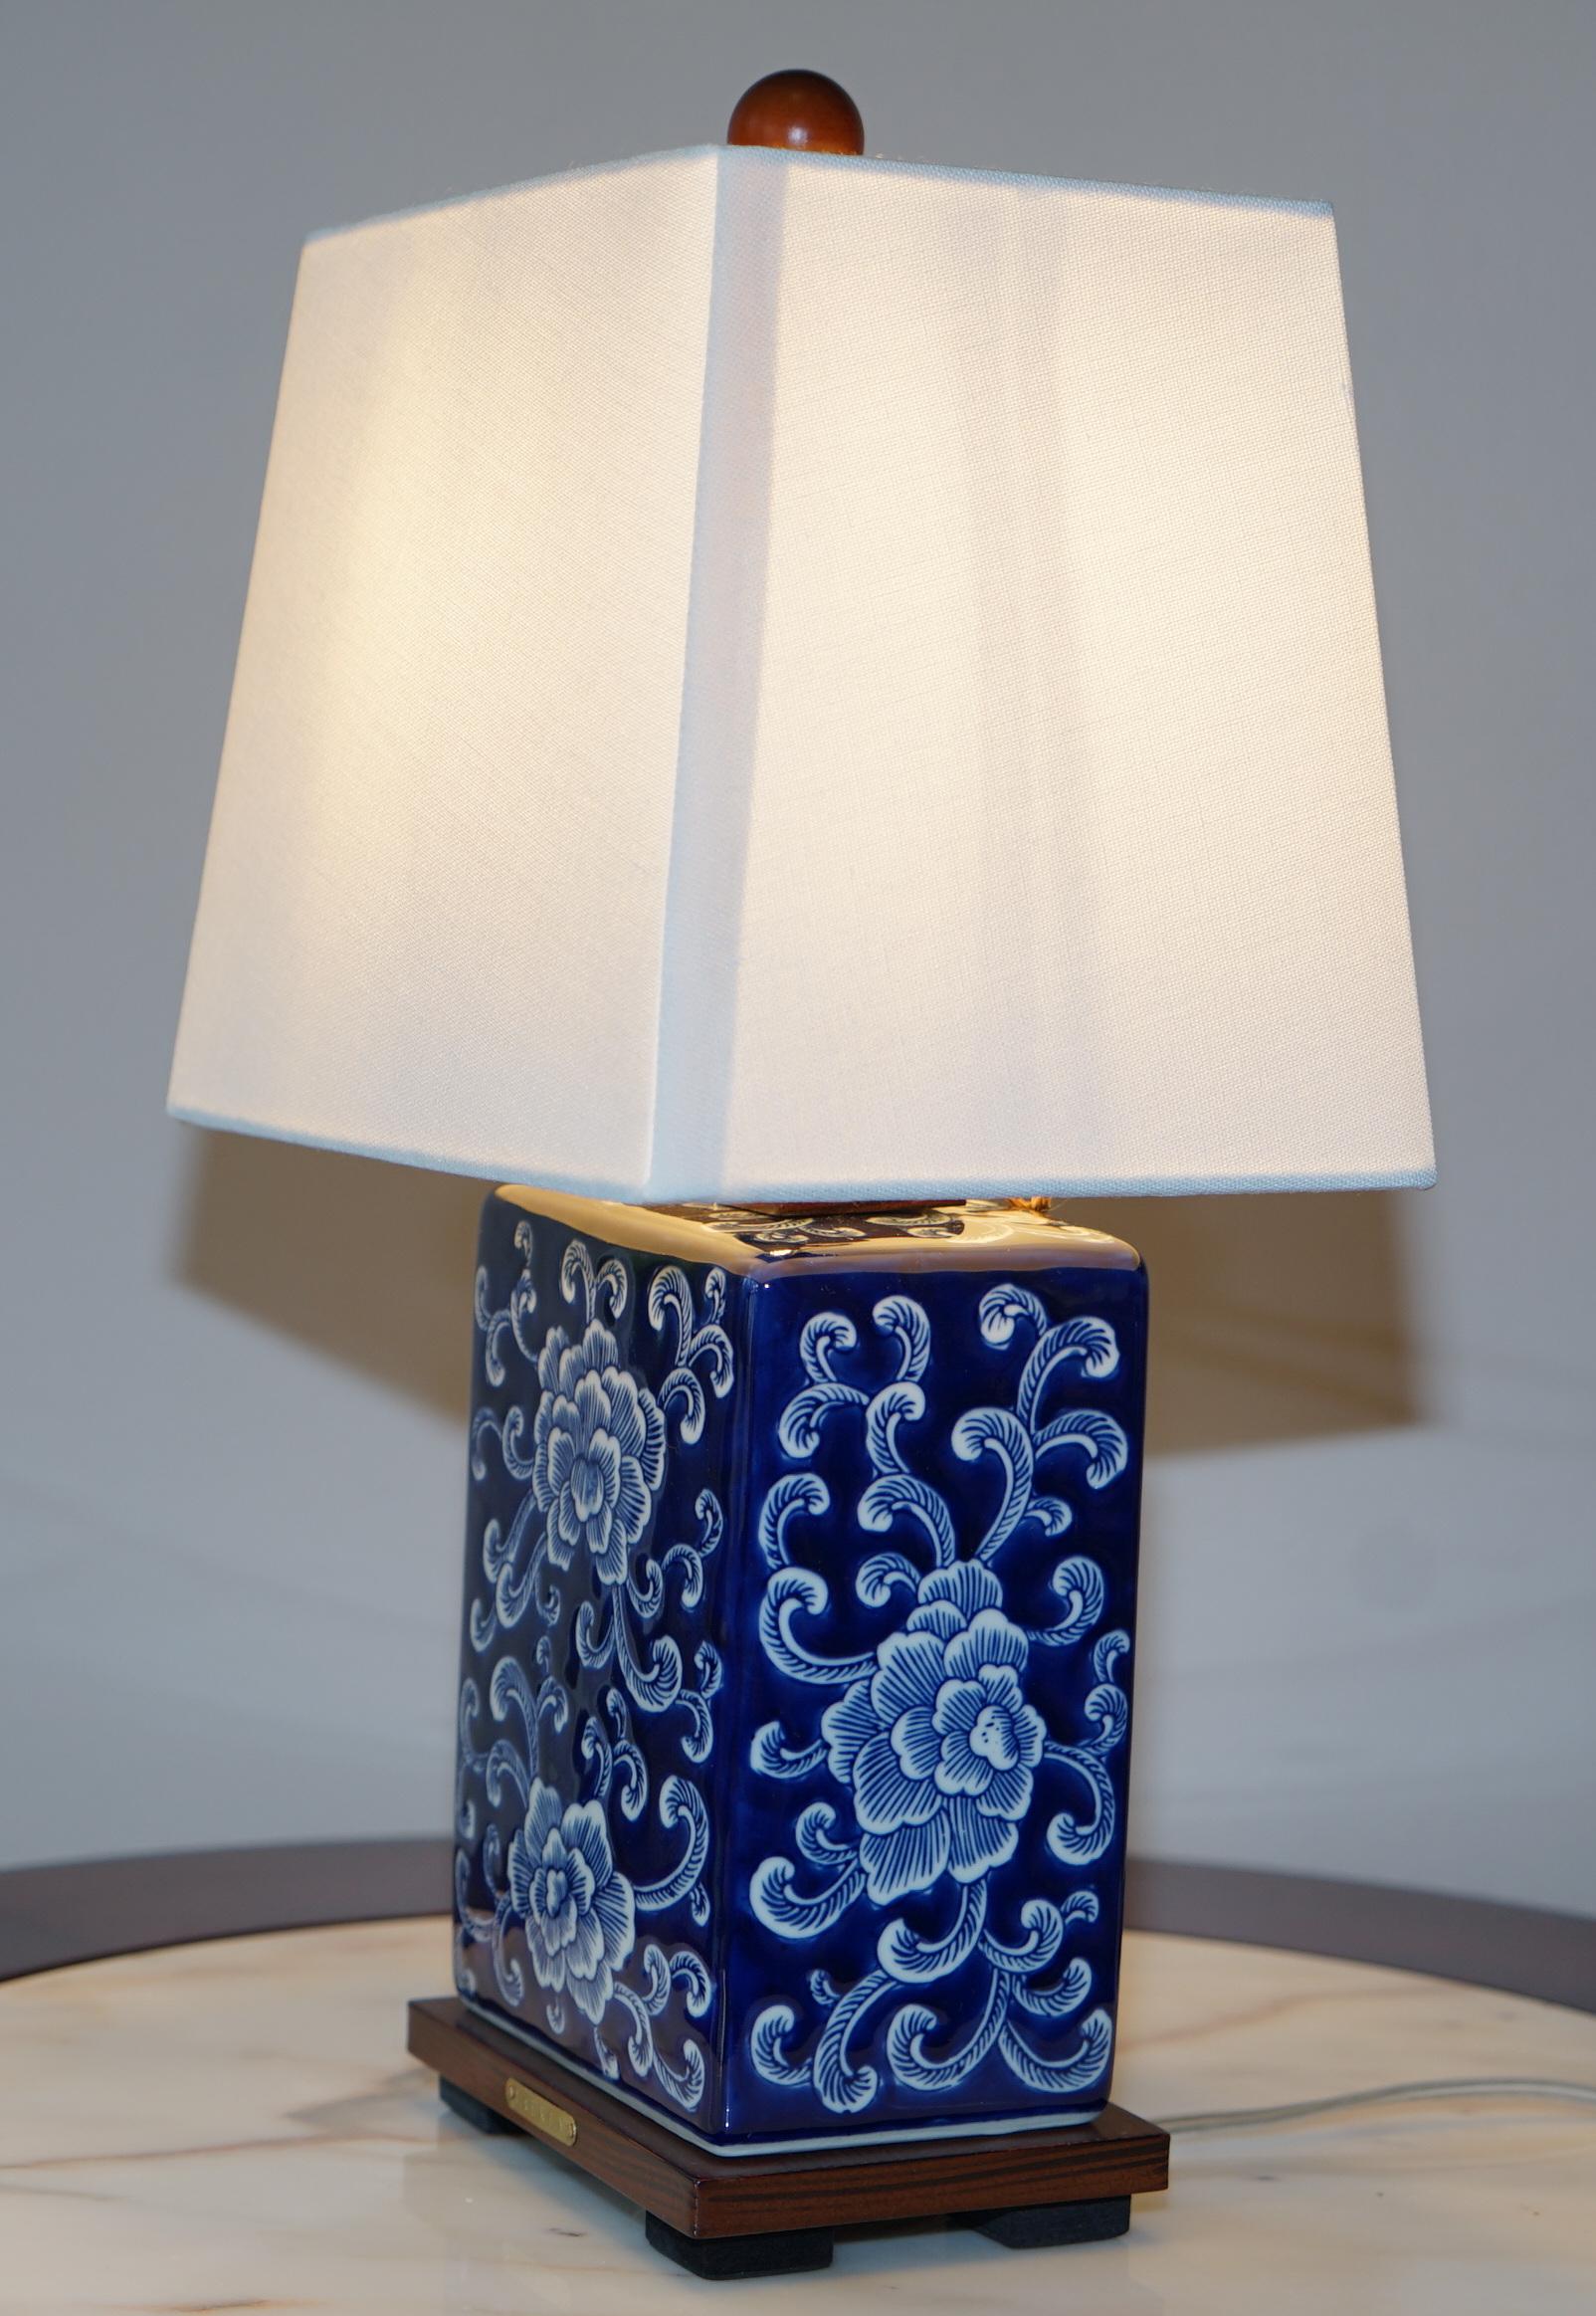 Pair of Ralph Lauren Blue Chinese Porcelain Table Lamps Stunning Chinese Design 2